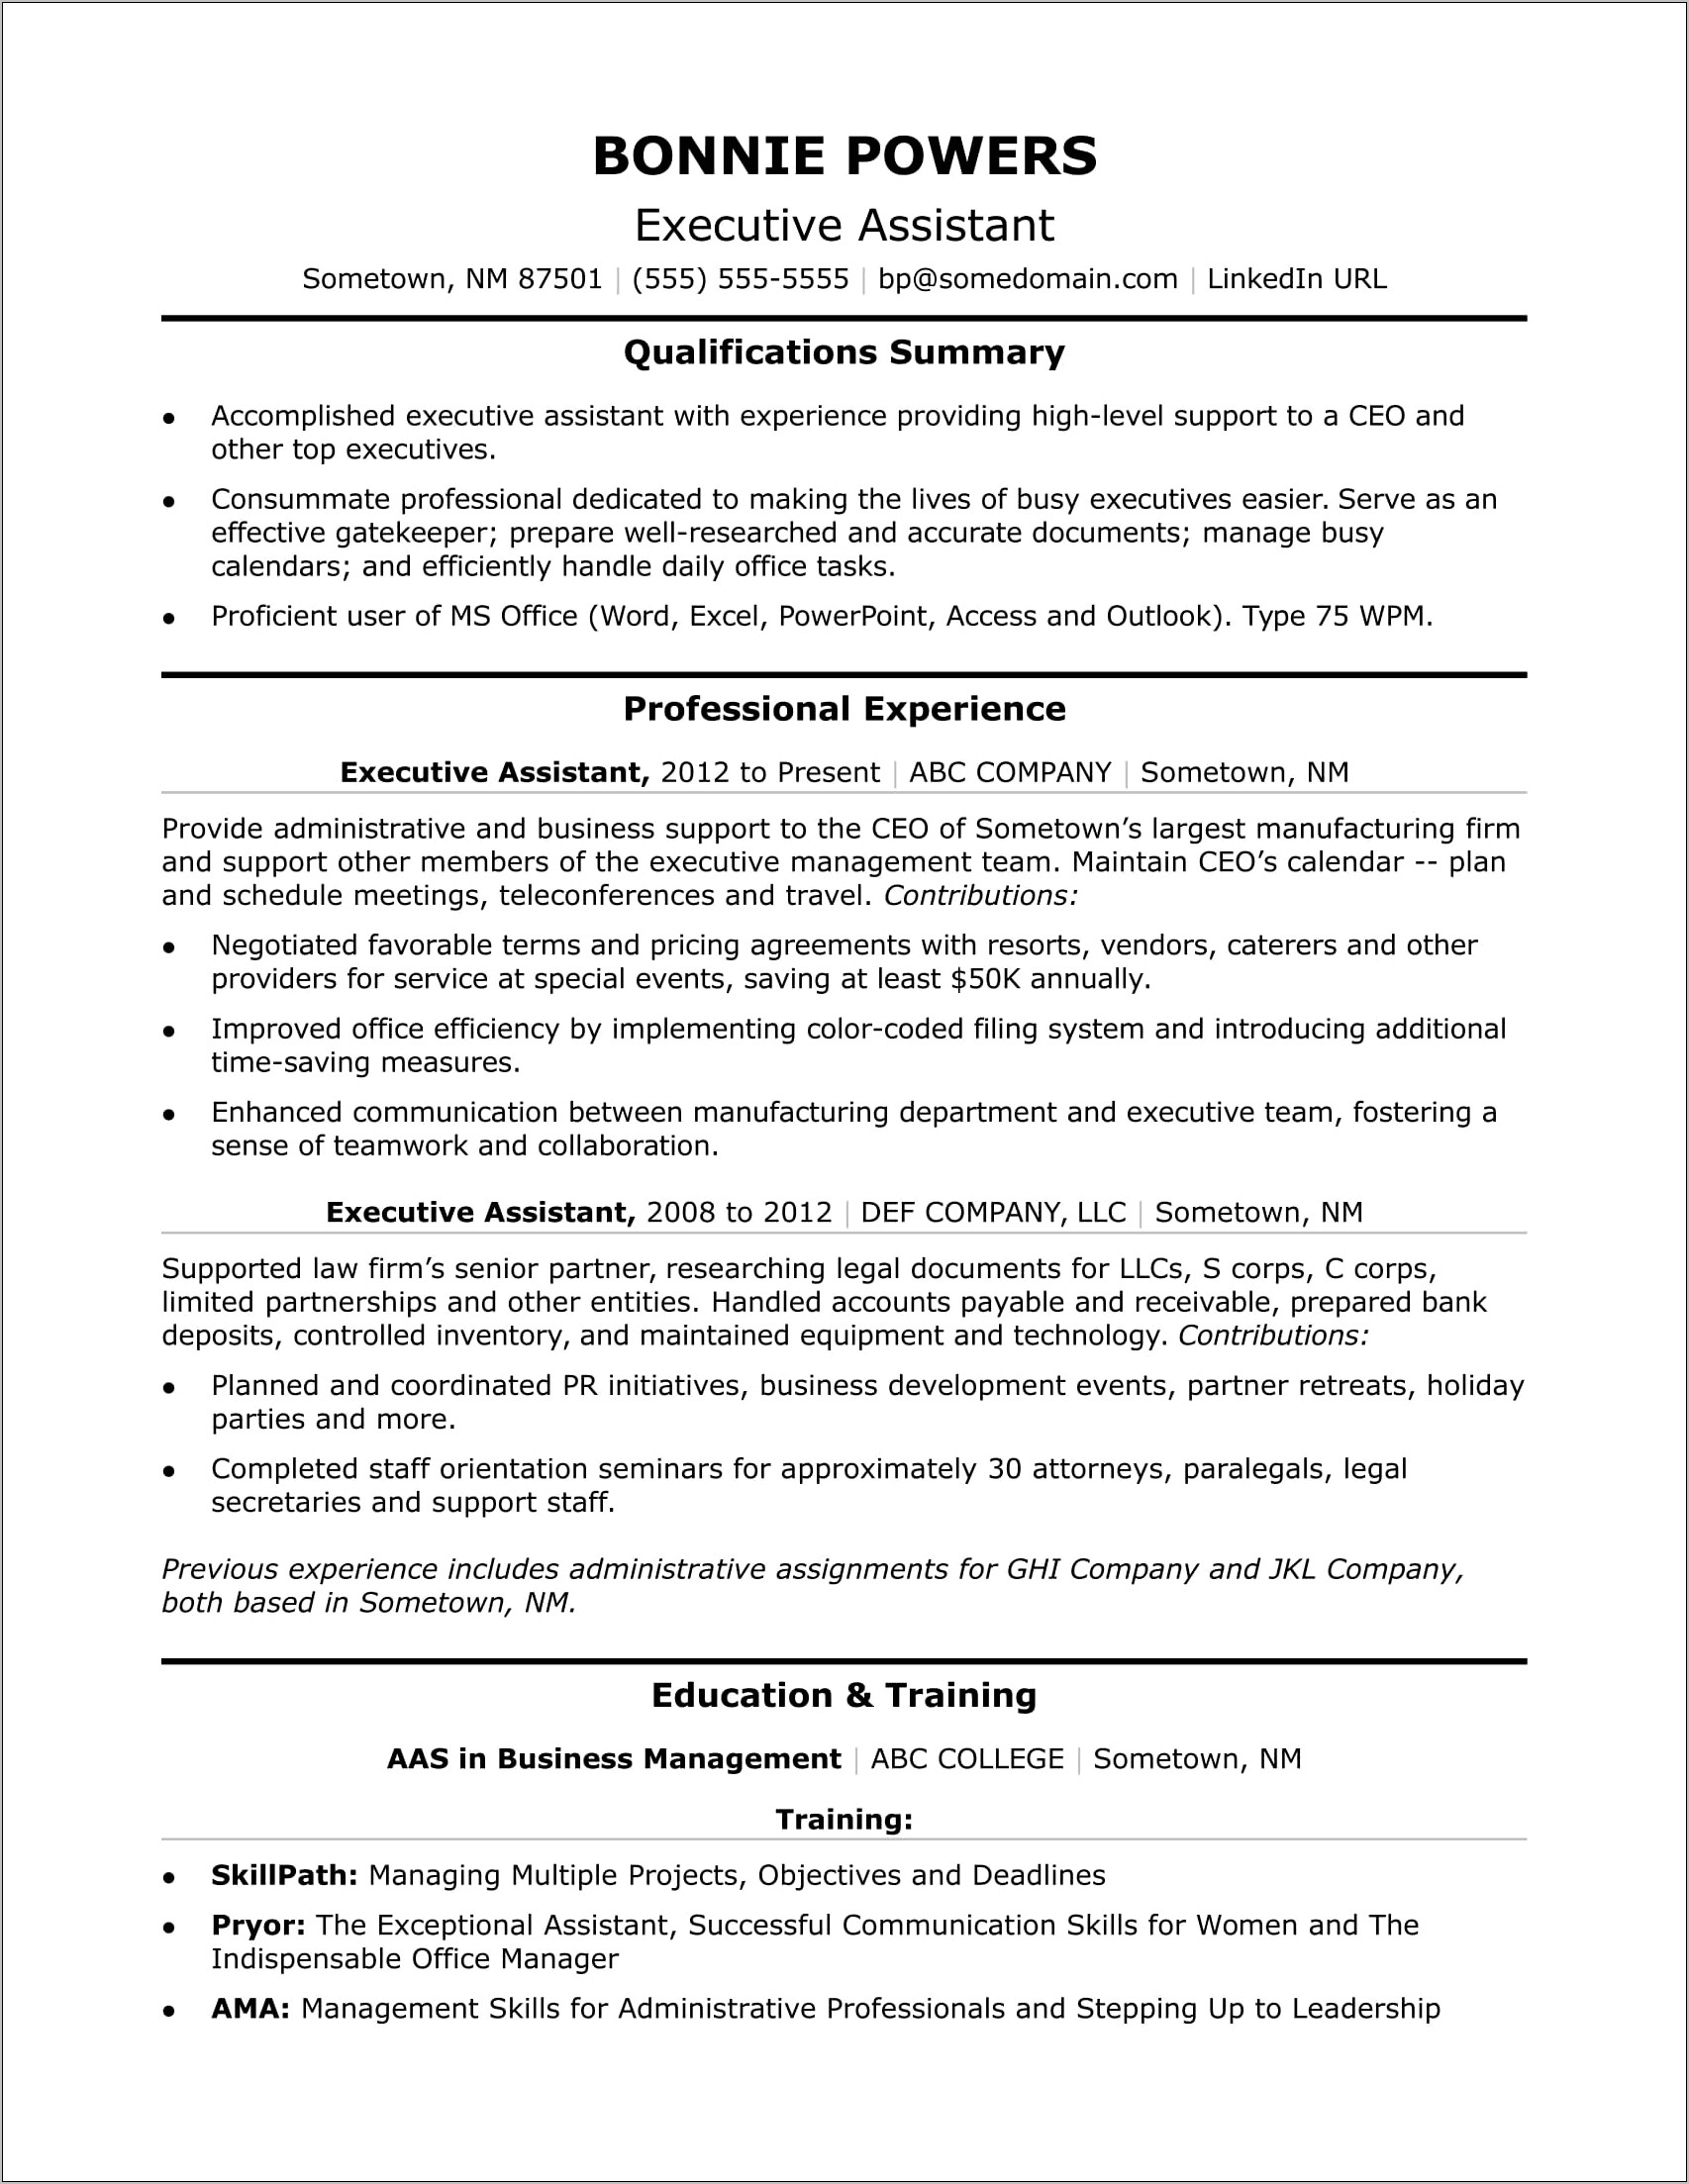 Resume Examples For Administrative Assistant Jobs